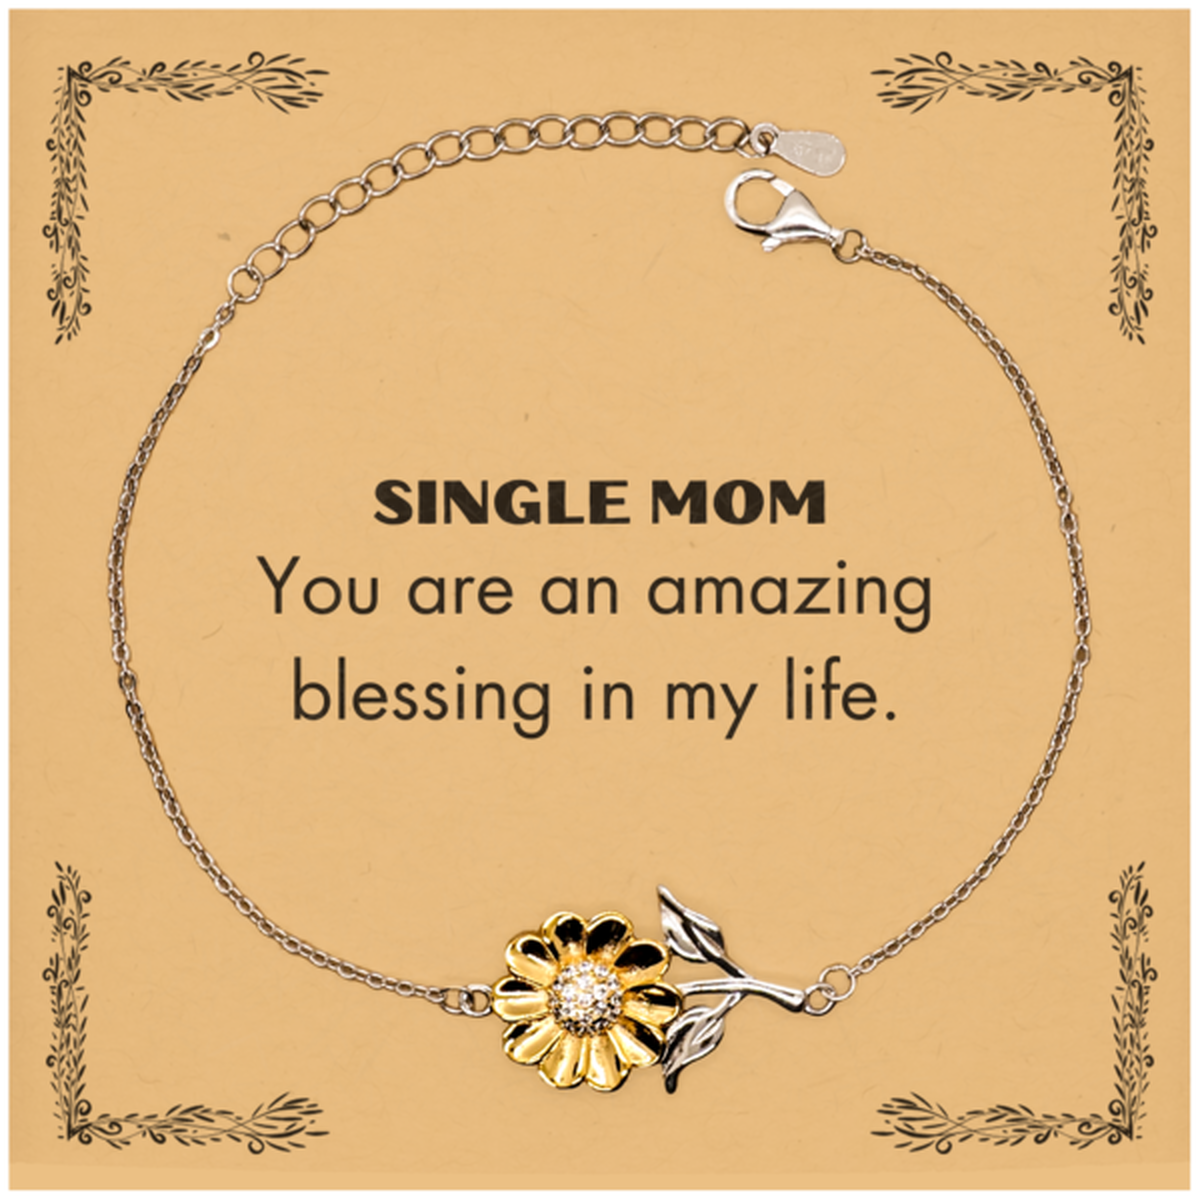 Single Mom Sunflower Bracelet, You are an amazing blessing in my life, Thank You Gifts For Single Mom, Inspirational Birthday Christmas Unique Gifts For Single Mom